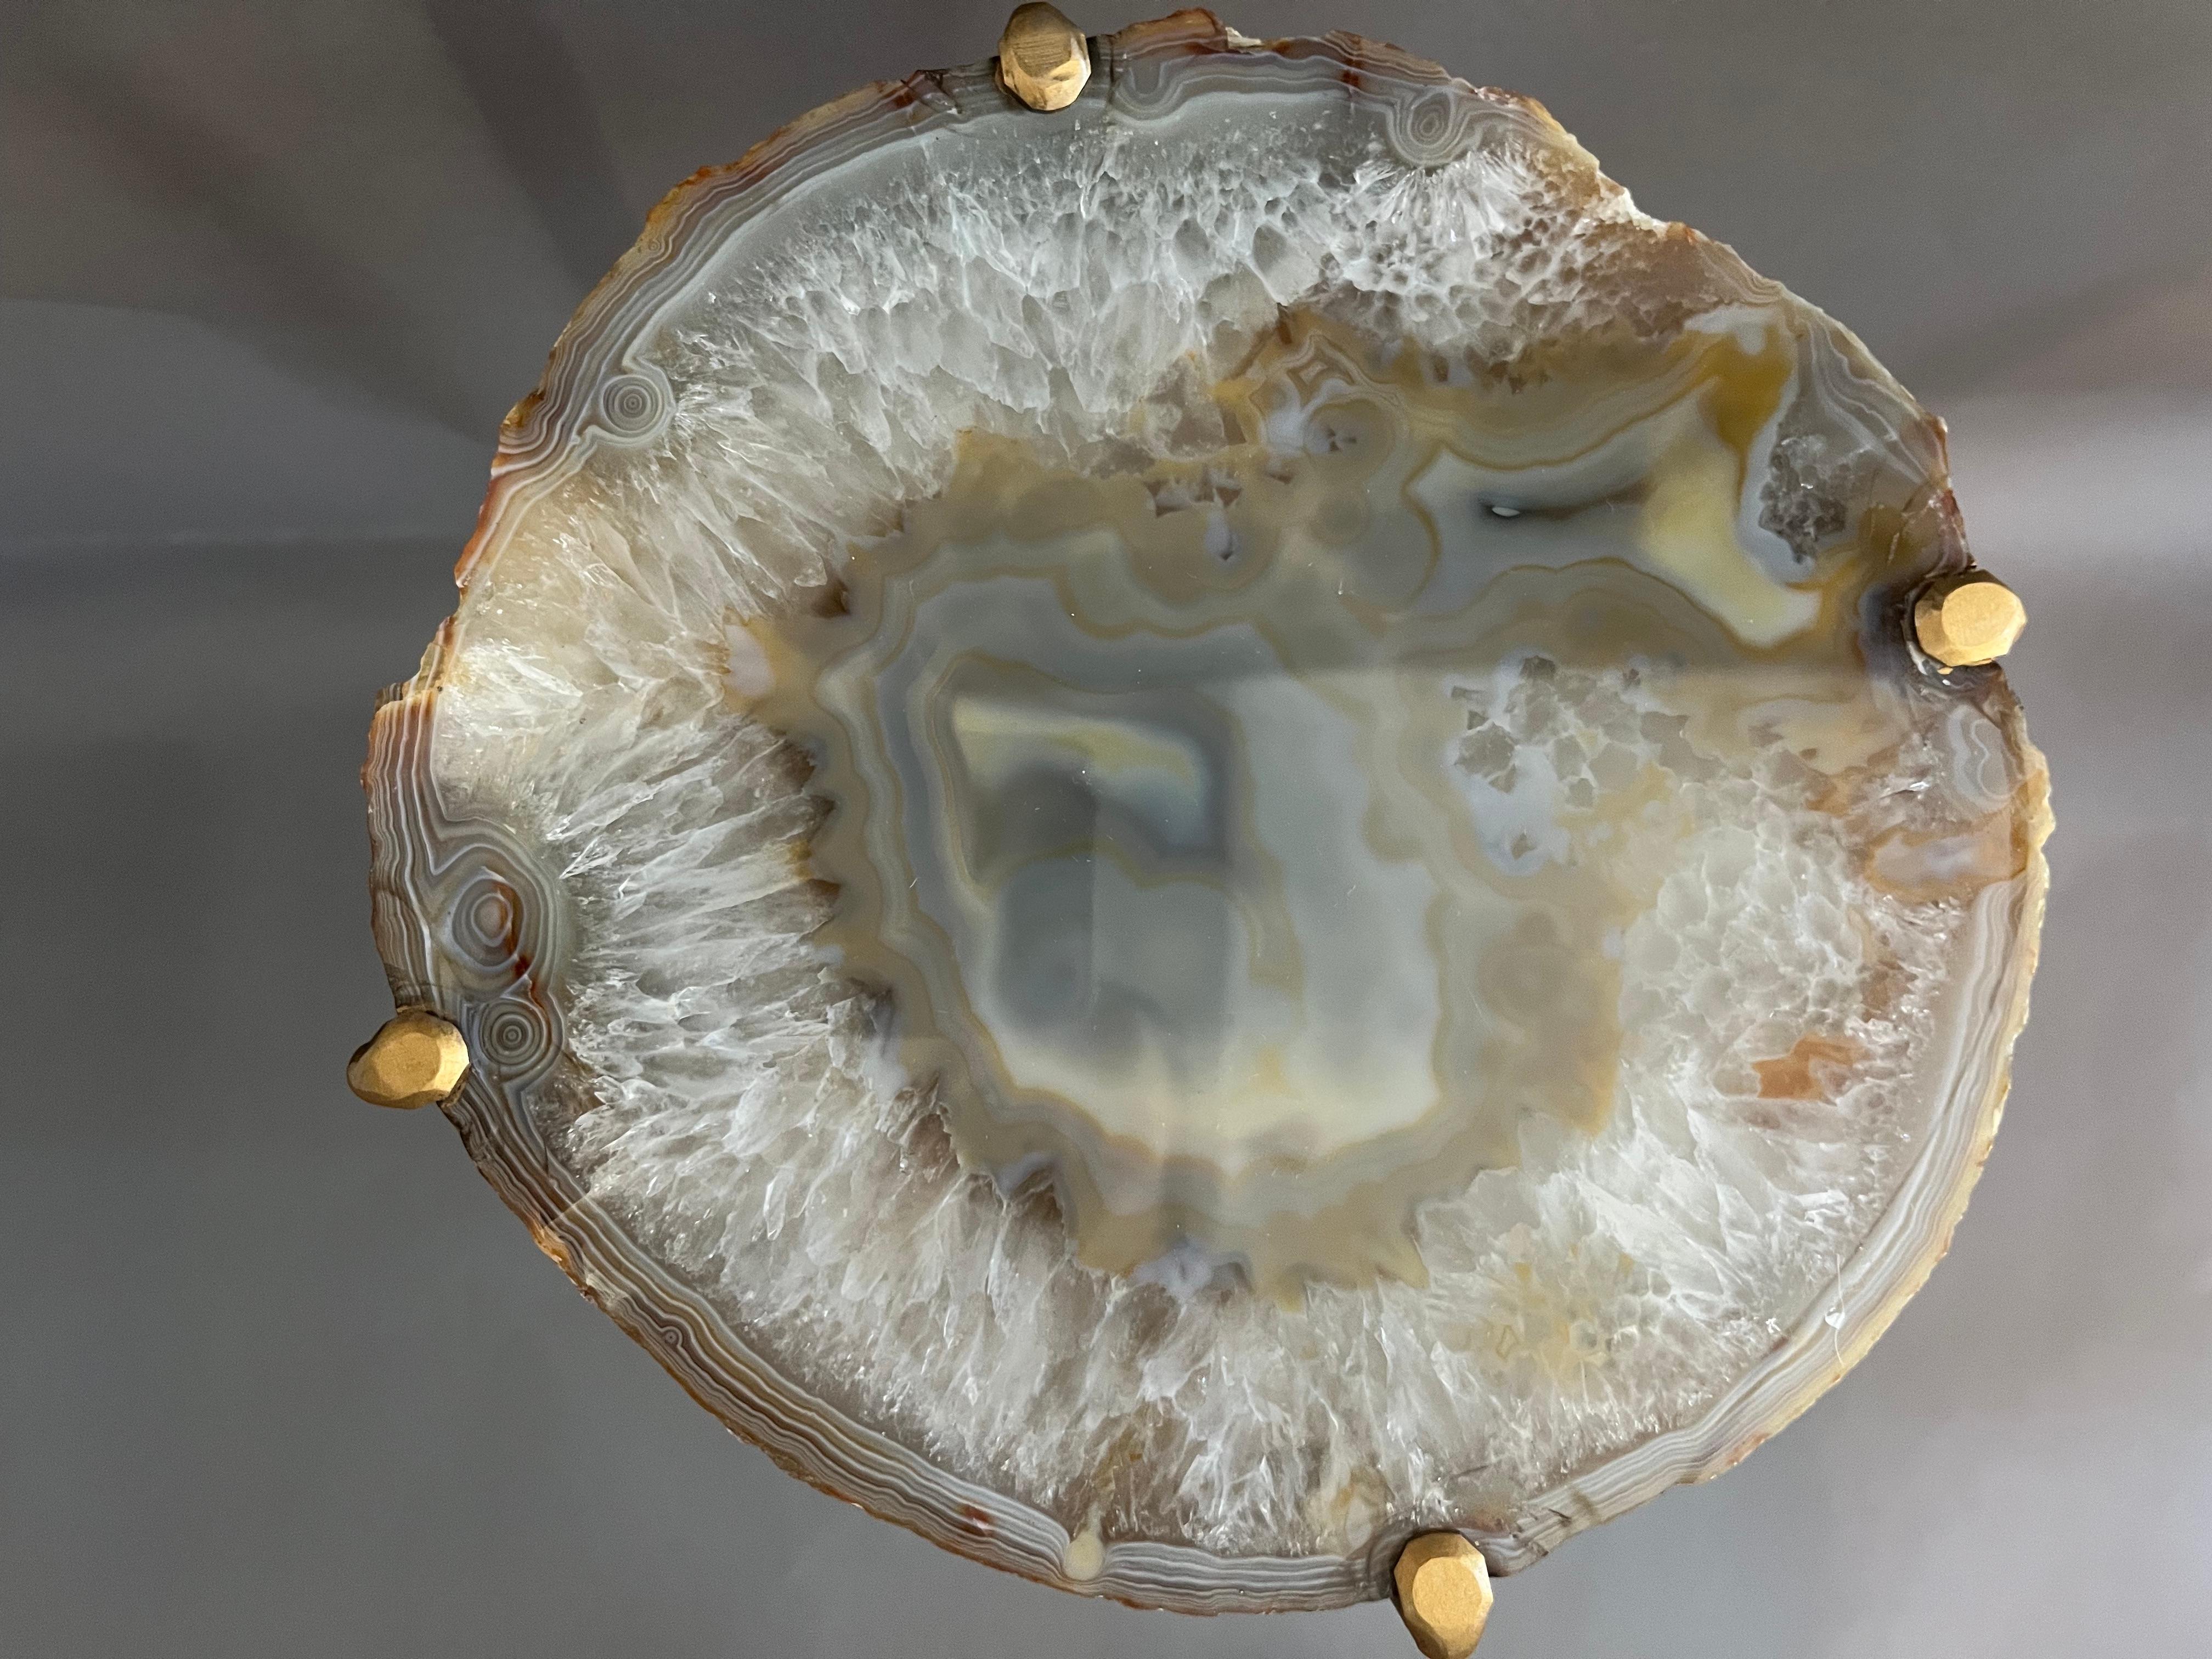 Our Geode Tables are crafted using one of a kind quartzite slabs, polished and set into a modern steel base. The depth of tone within the geode, when near a light source is captivating.  Handcrafted with one of a kind quartzite slabs and gold gilt